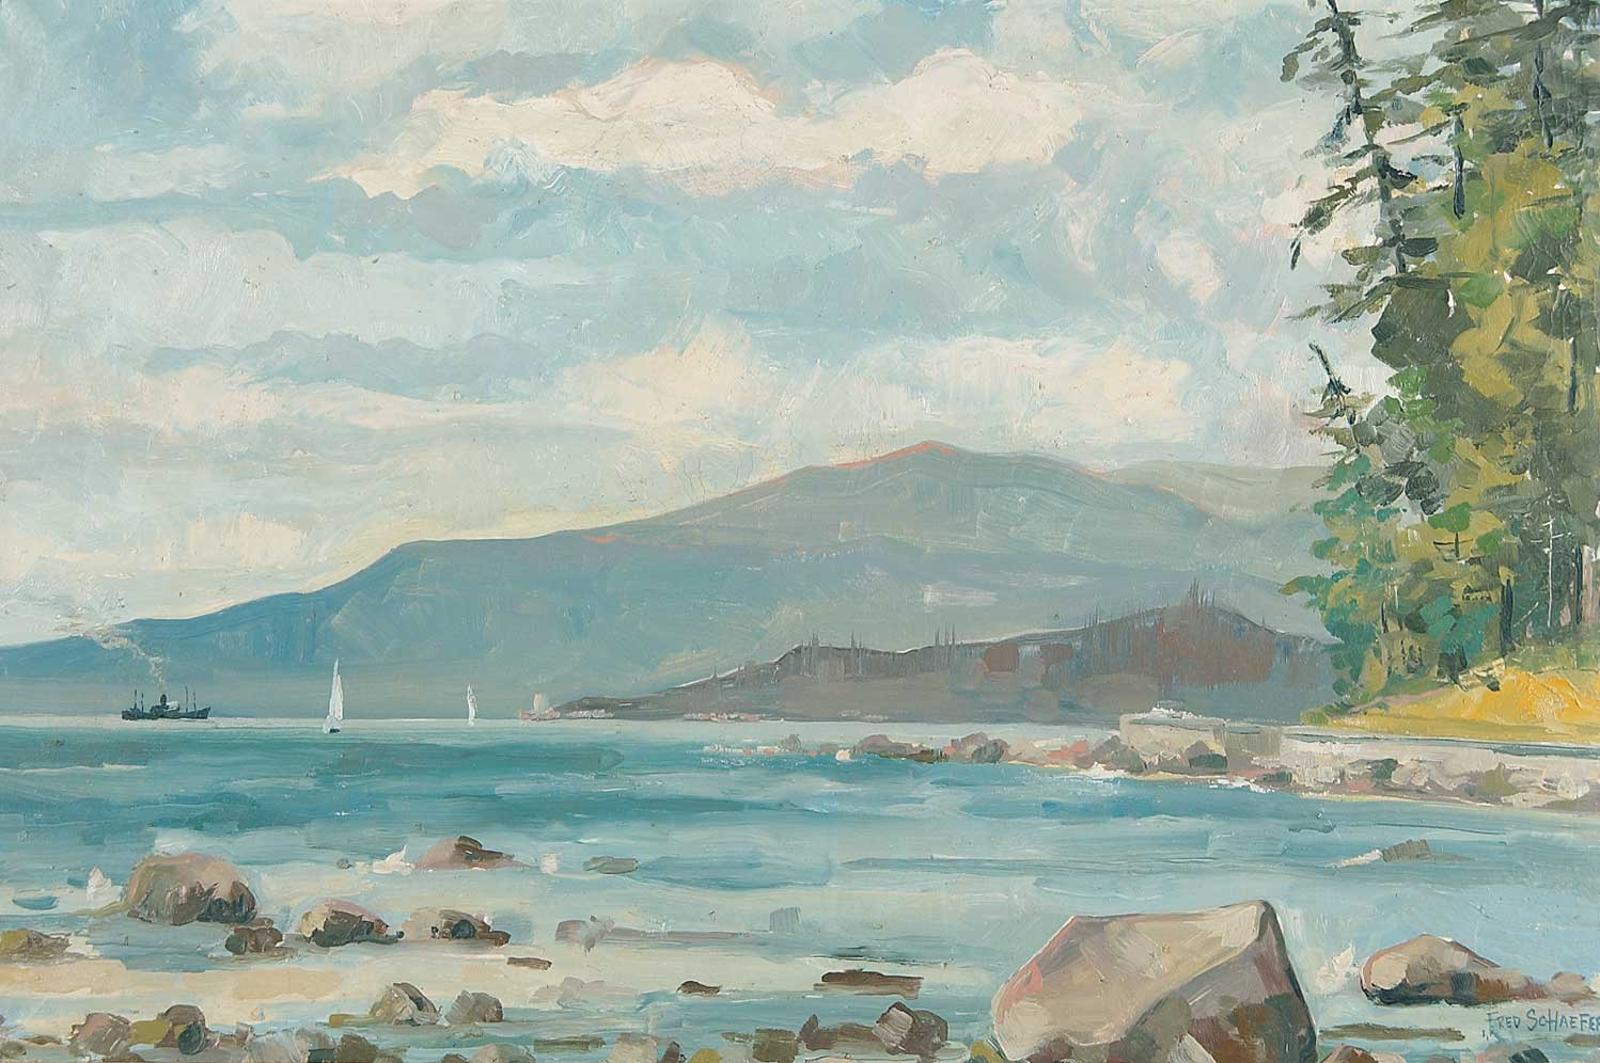 Fred Schaefer (1929-2001) - View of North Shore from Kitsilano